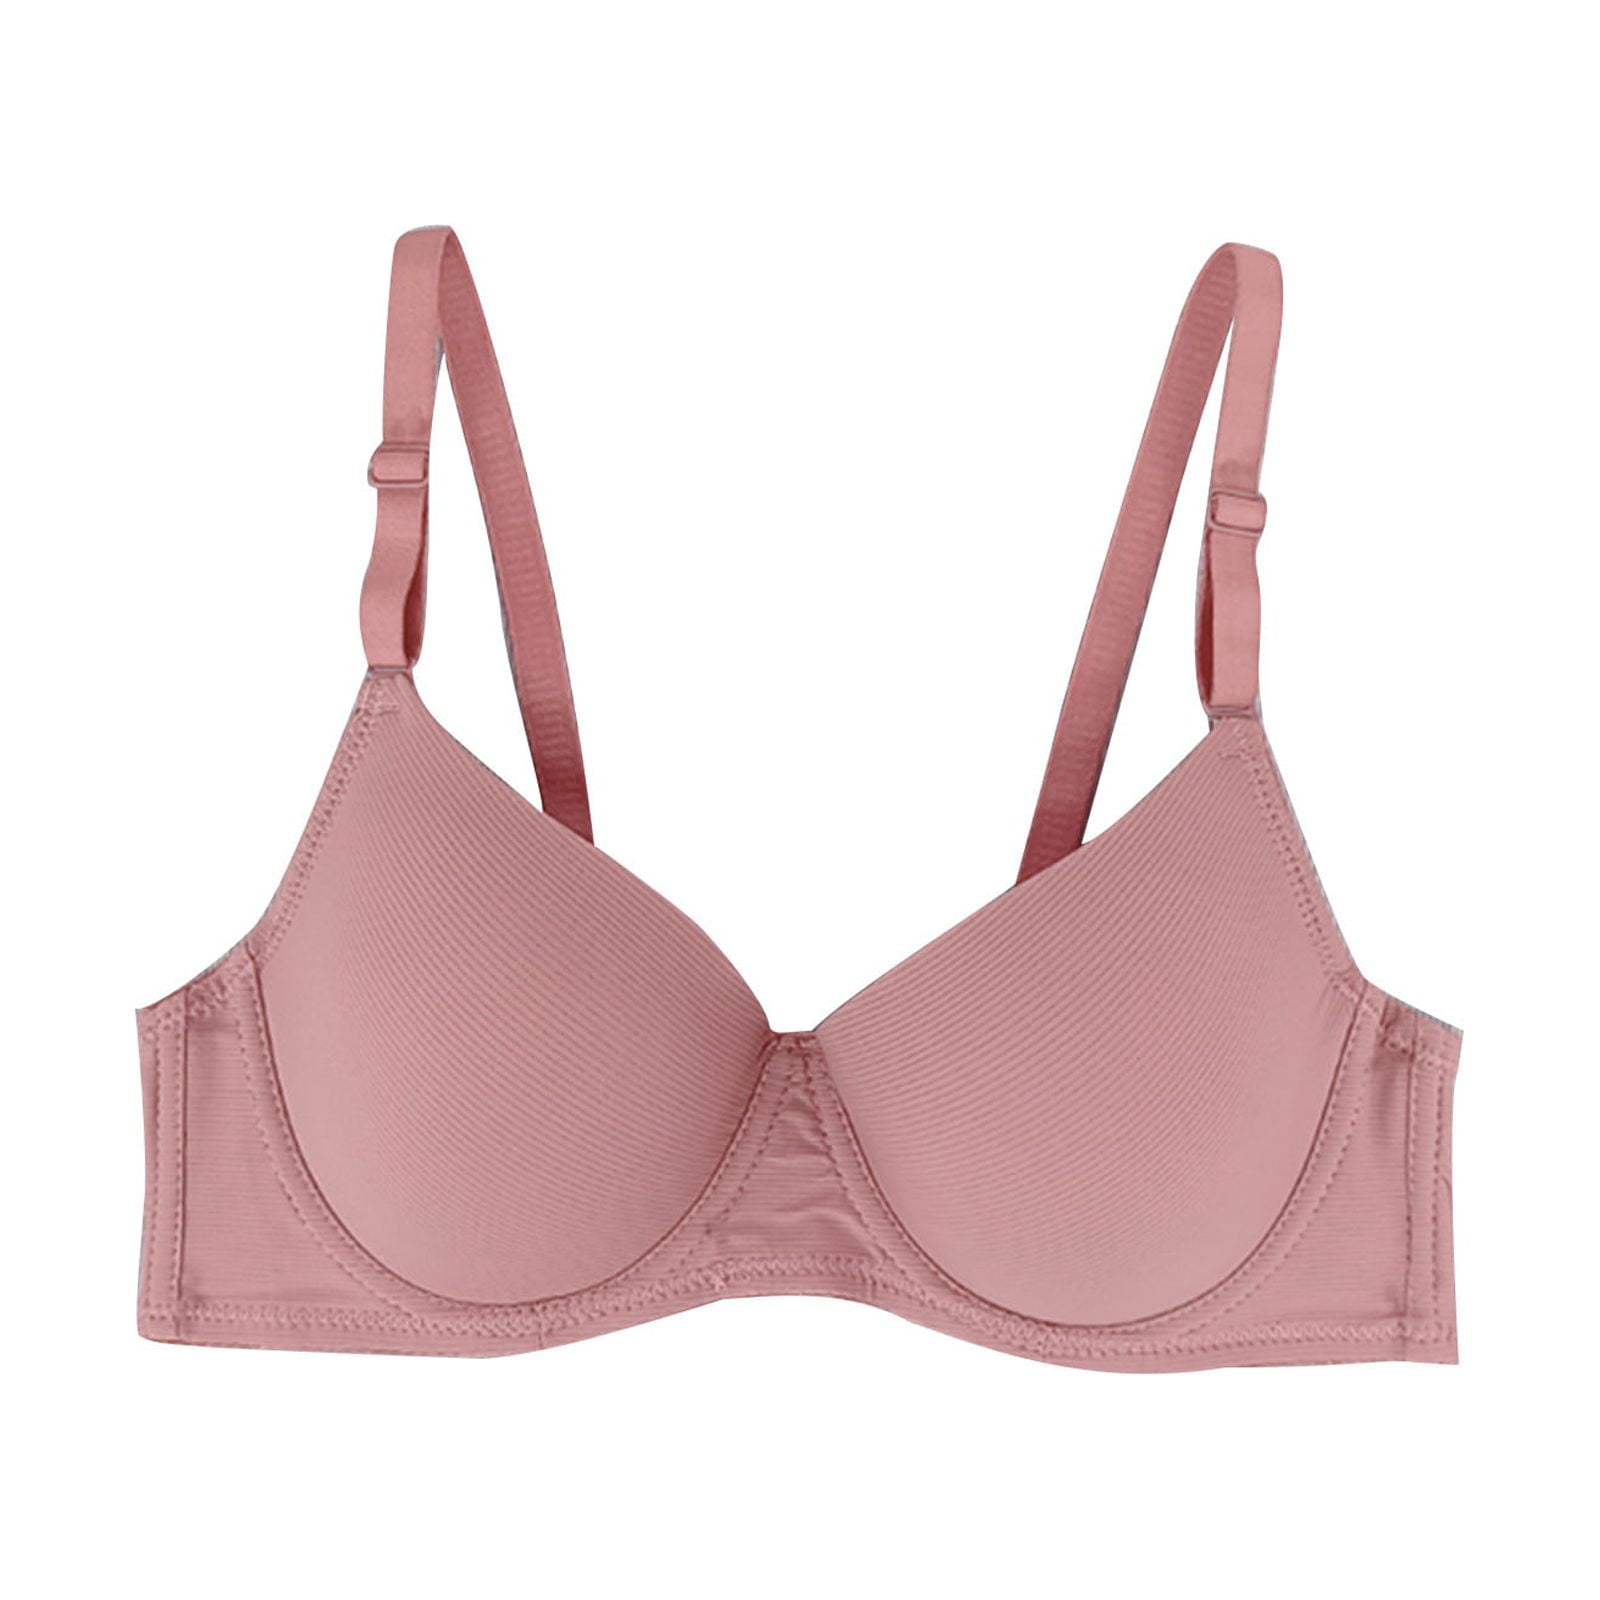 HAPIMO Everyday Bras for Women Comfort Daily Brassiere Stretch